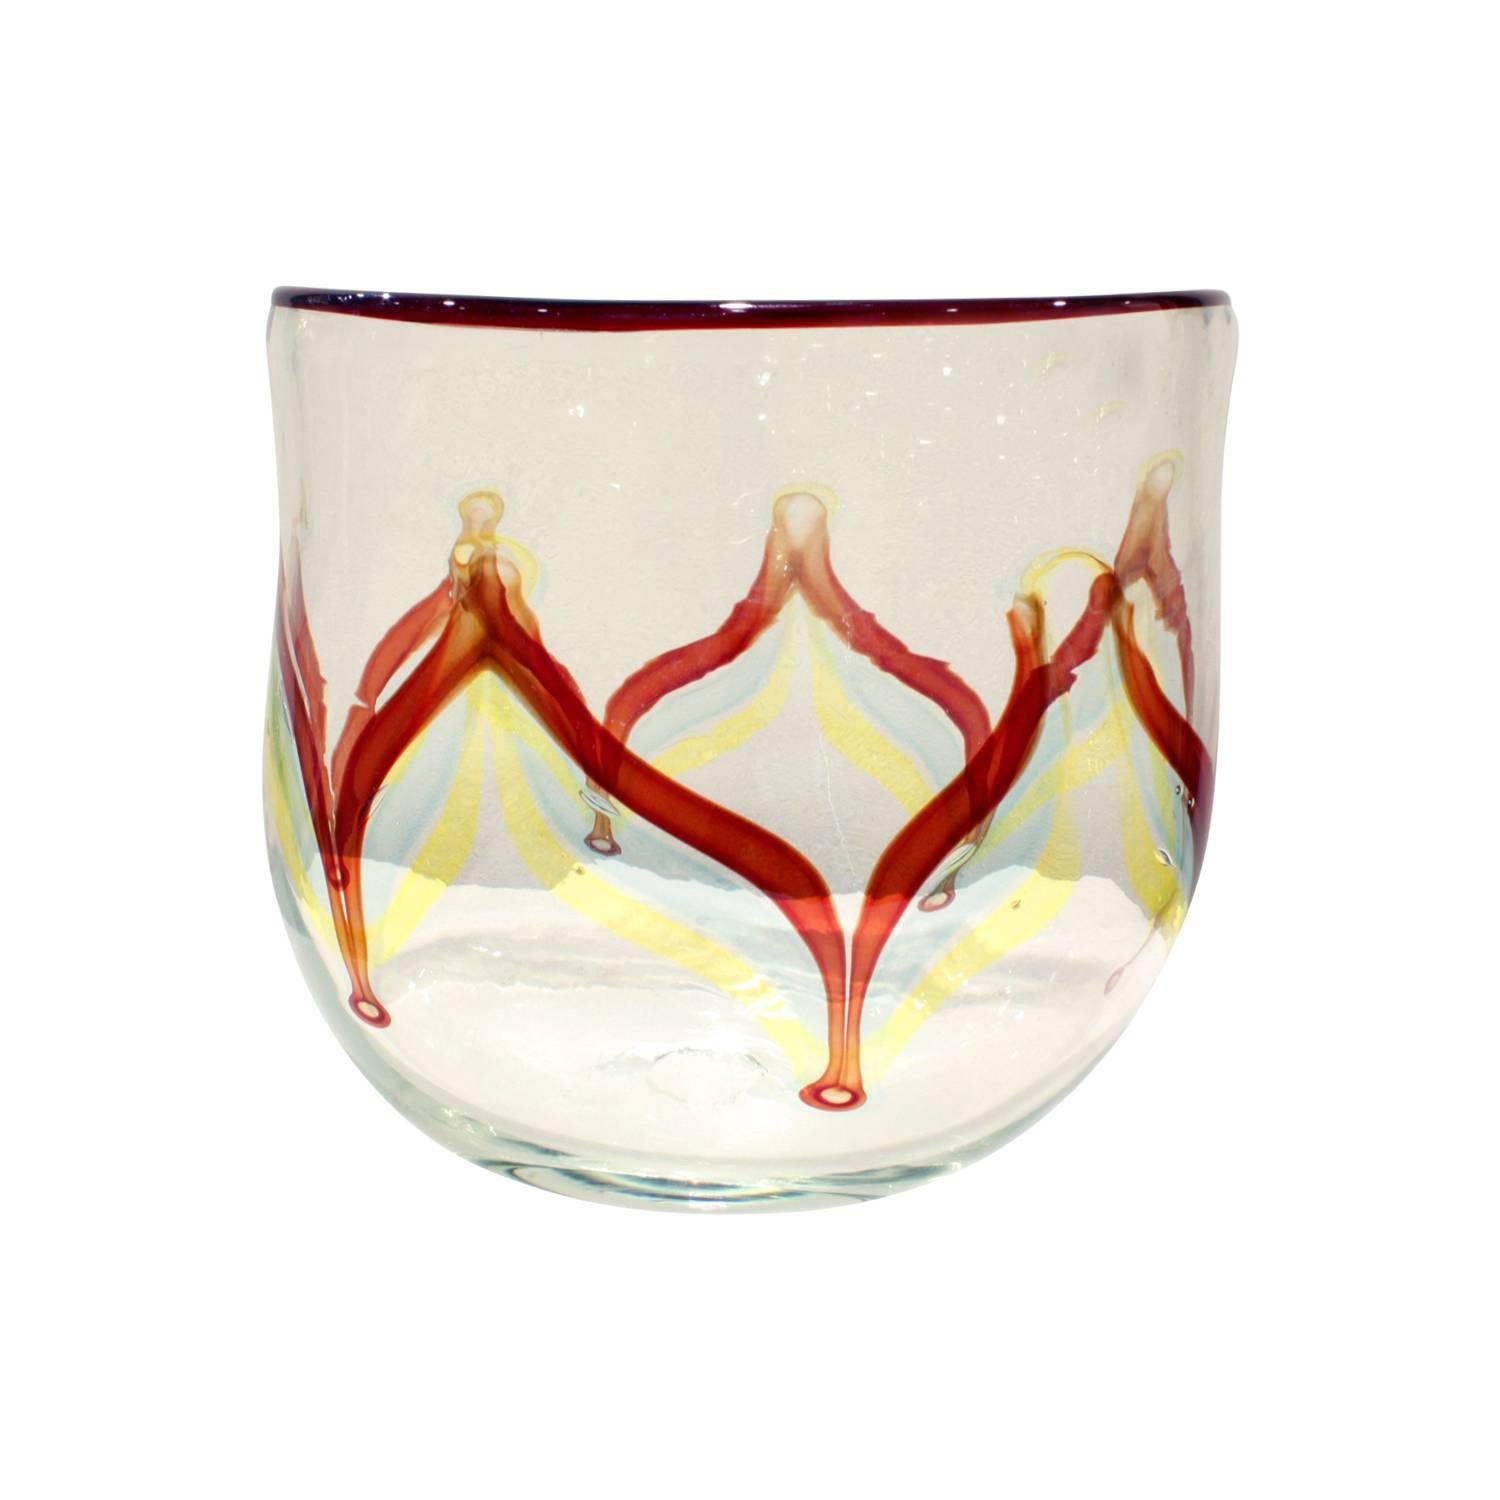 Handblown glass vase with red, light blue and yellow clear rod decoration and red rim by Arte Vetraria Muranese (A.V.E.M.), Murano Italy, 1950s.